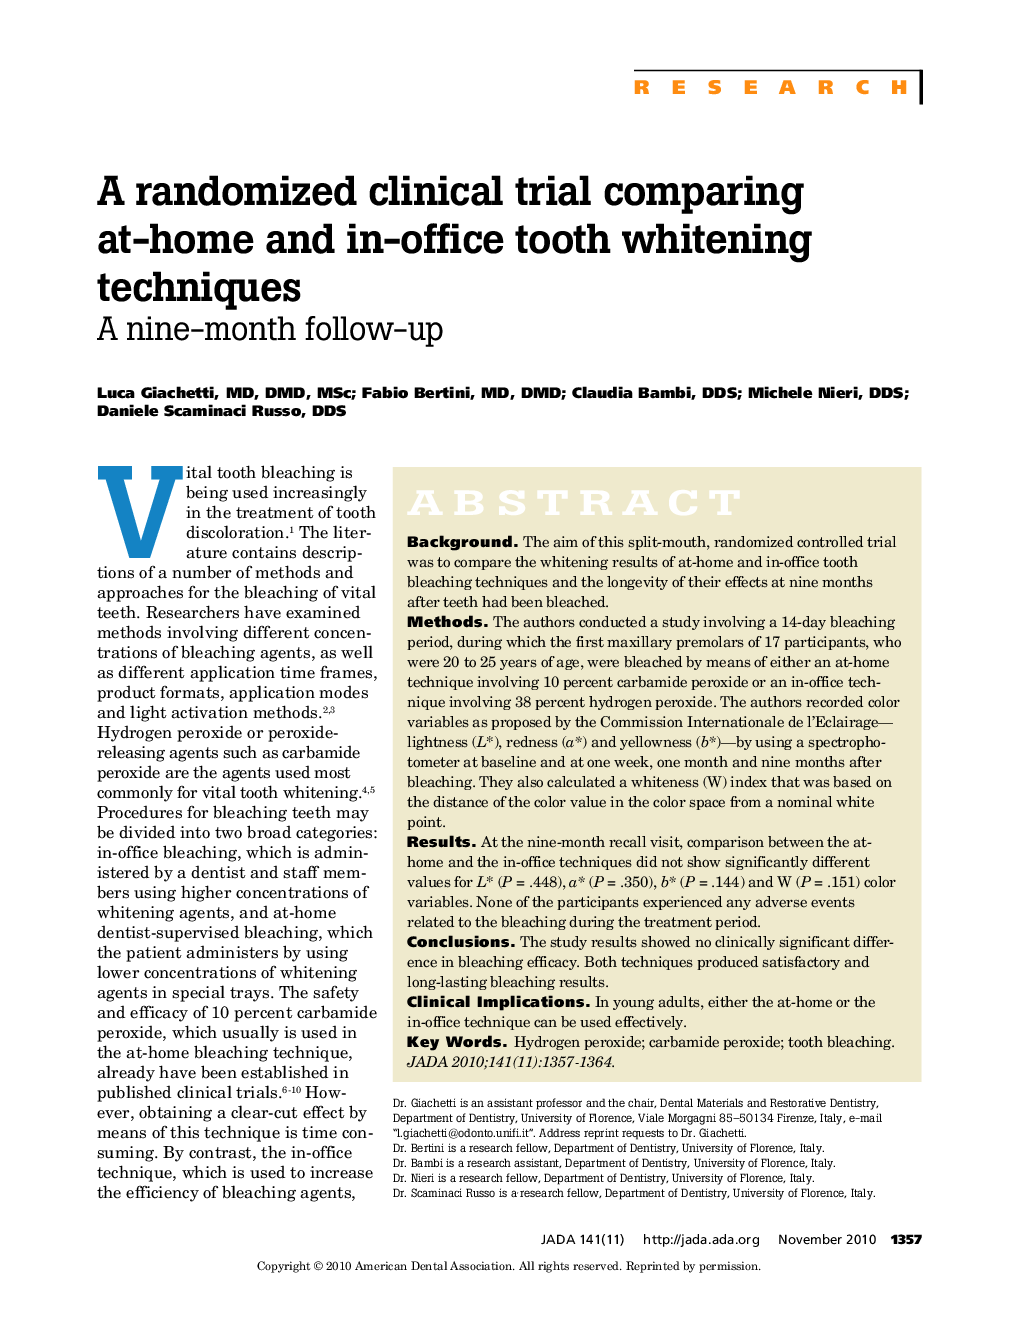 A Randomized Clinical Trial Comparing At-Home and In-Office Tooth Whitening Techniques : A nine-month follow-up